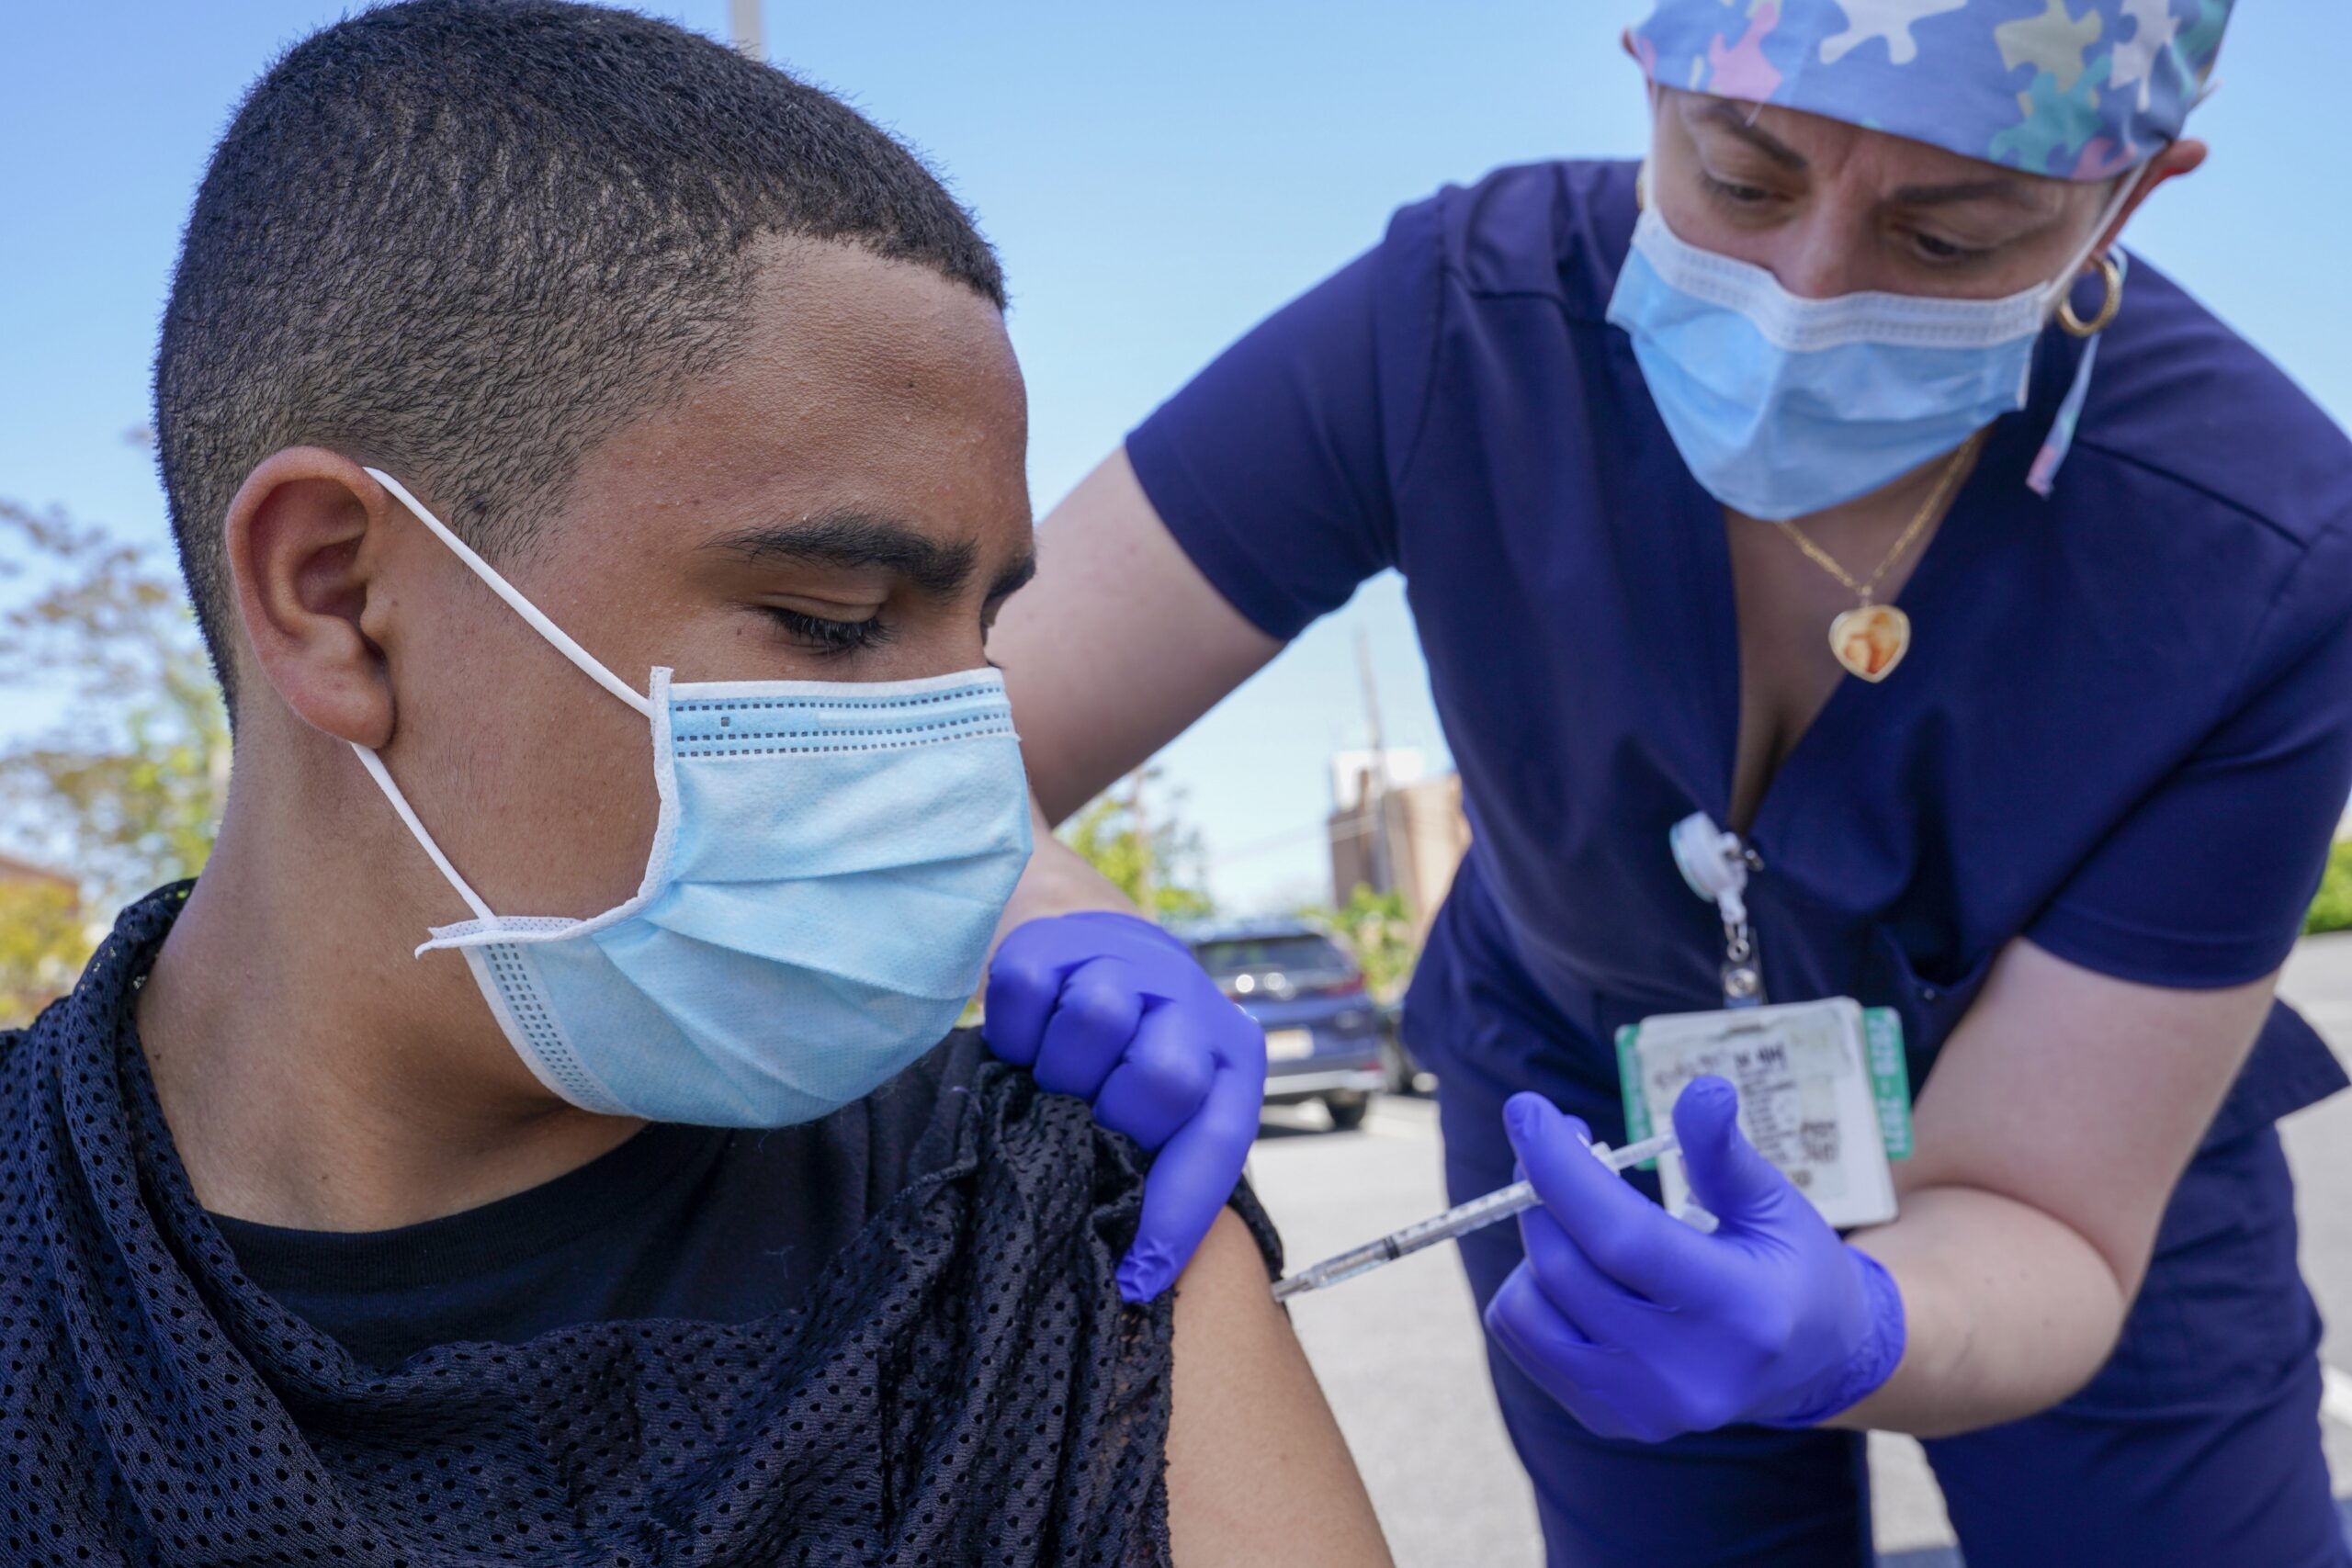 Justin Bishop watches as Registered Nurse Jennifer Reyes inoculates him with the first dose of the Pfizer COVID-19 vaccine